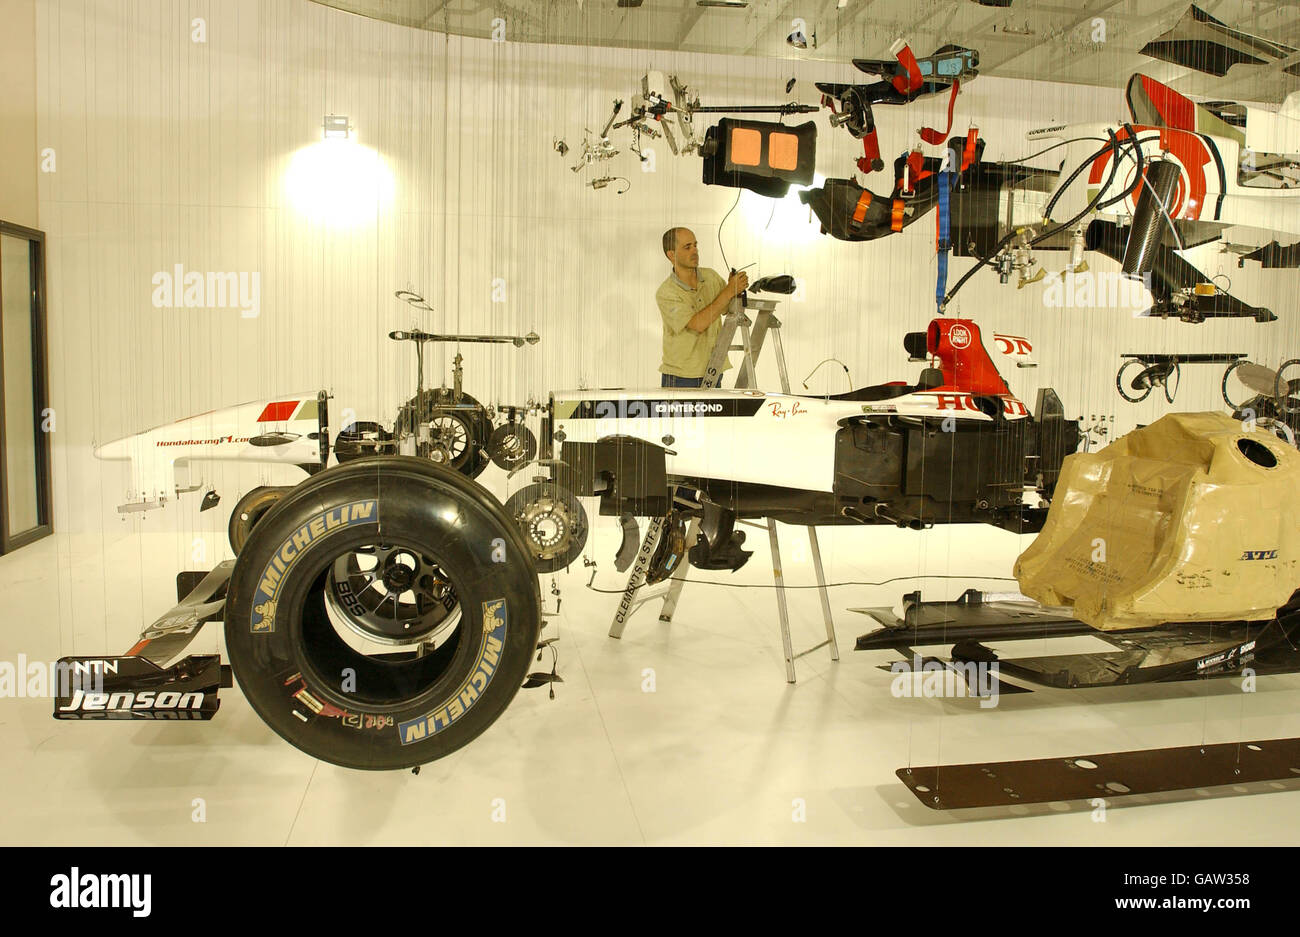 Paul Veroude puts the finishing touches to his work, 'View Suspended', an exploded view of a Honda Racing Formula 1 car, at the British International Motor Show at Excel, east London. Stock Photo